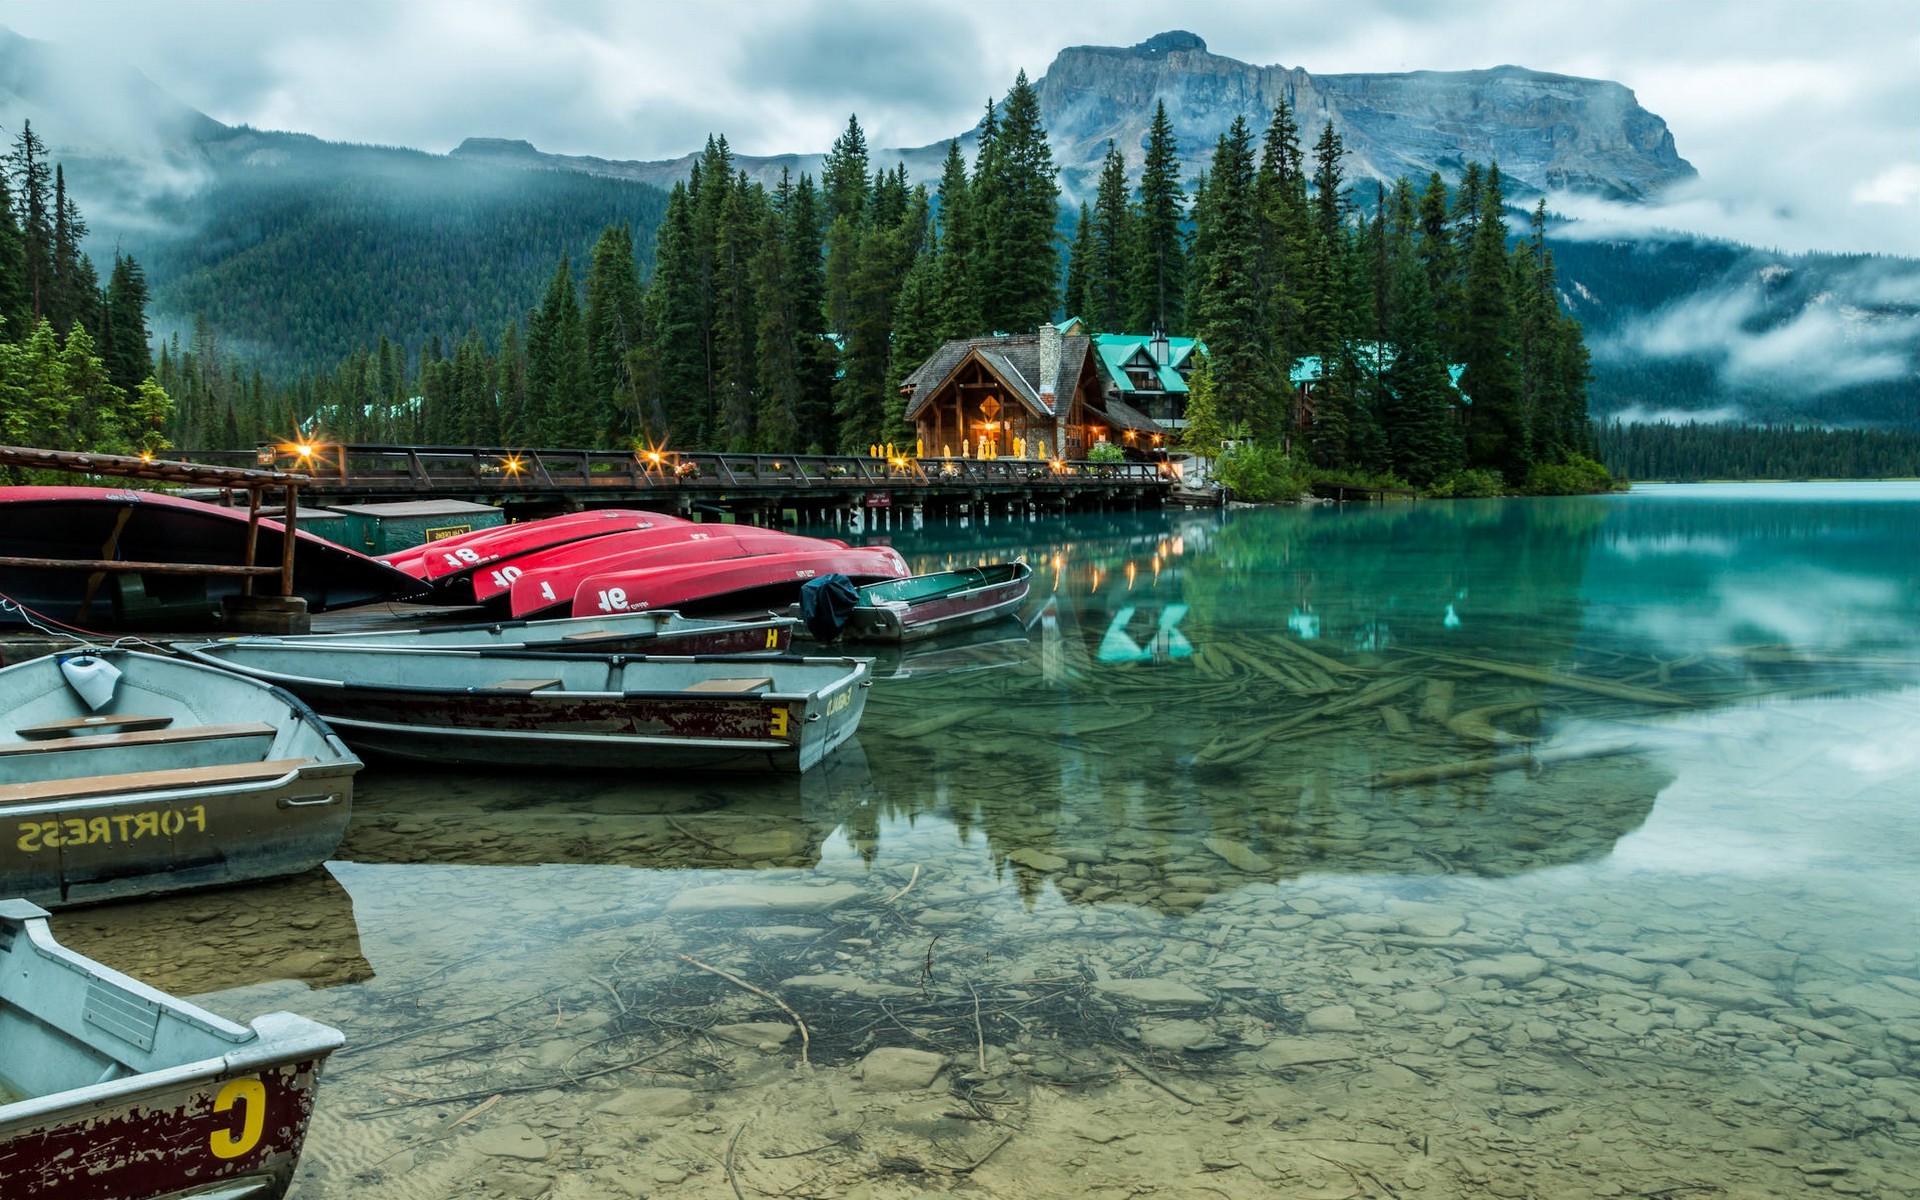 nature, Landscape, Lake, Hotels, Banff National Park, Boat, Canoes, Trees, Mountain, Mist, Forest, Water Wallpaper